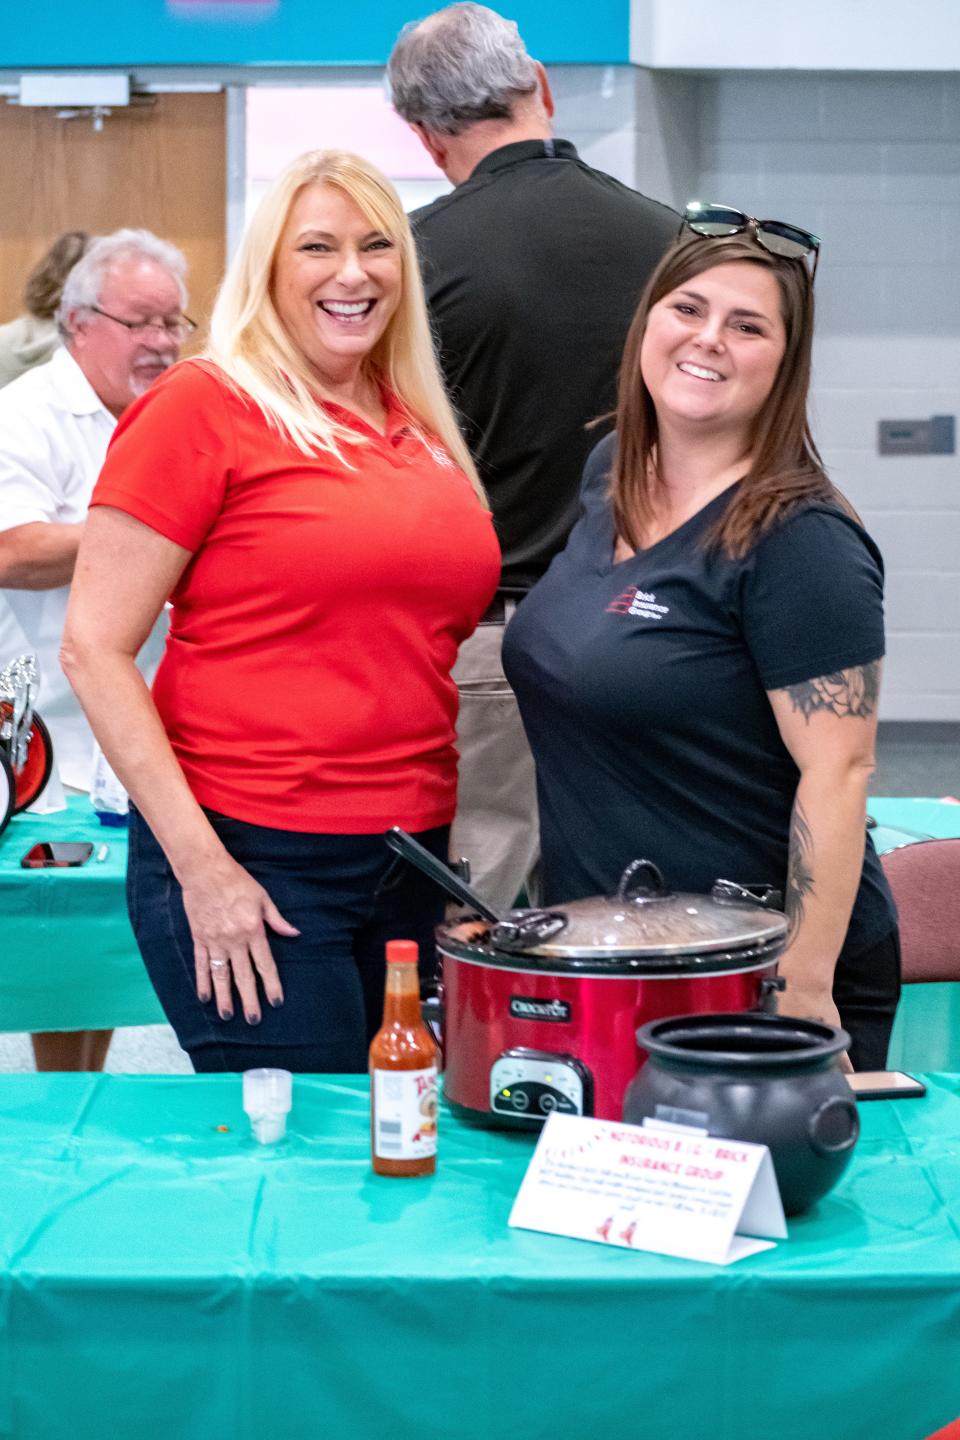 Kearny Hambrick and Rachel Friensehner with the Brick Insurance Group brought their Notorious B.I.G. Chili to the Young Leaders 2022 cook-off.